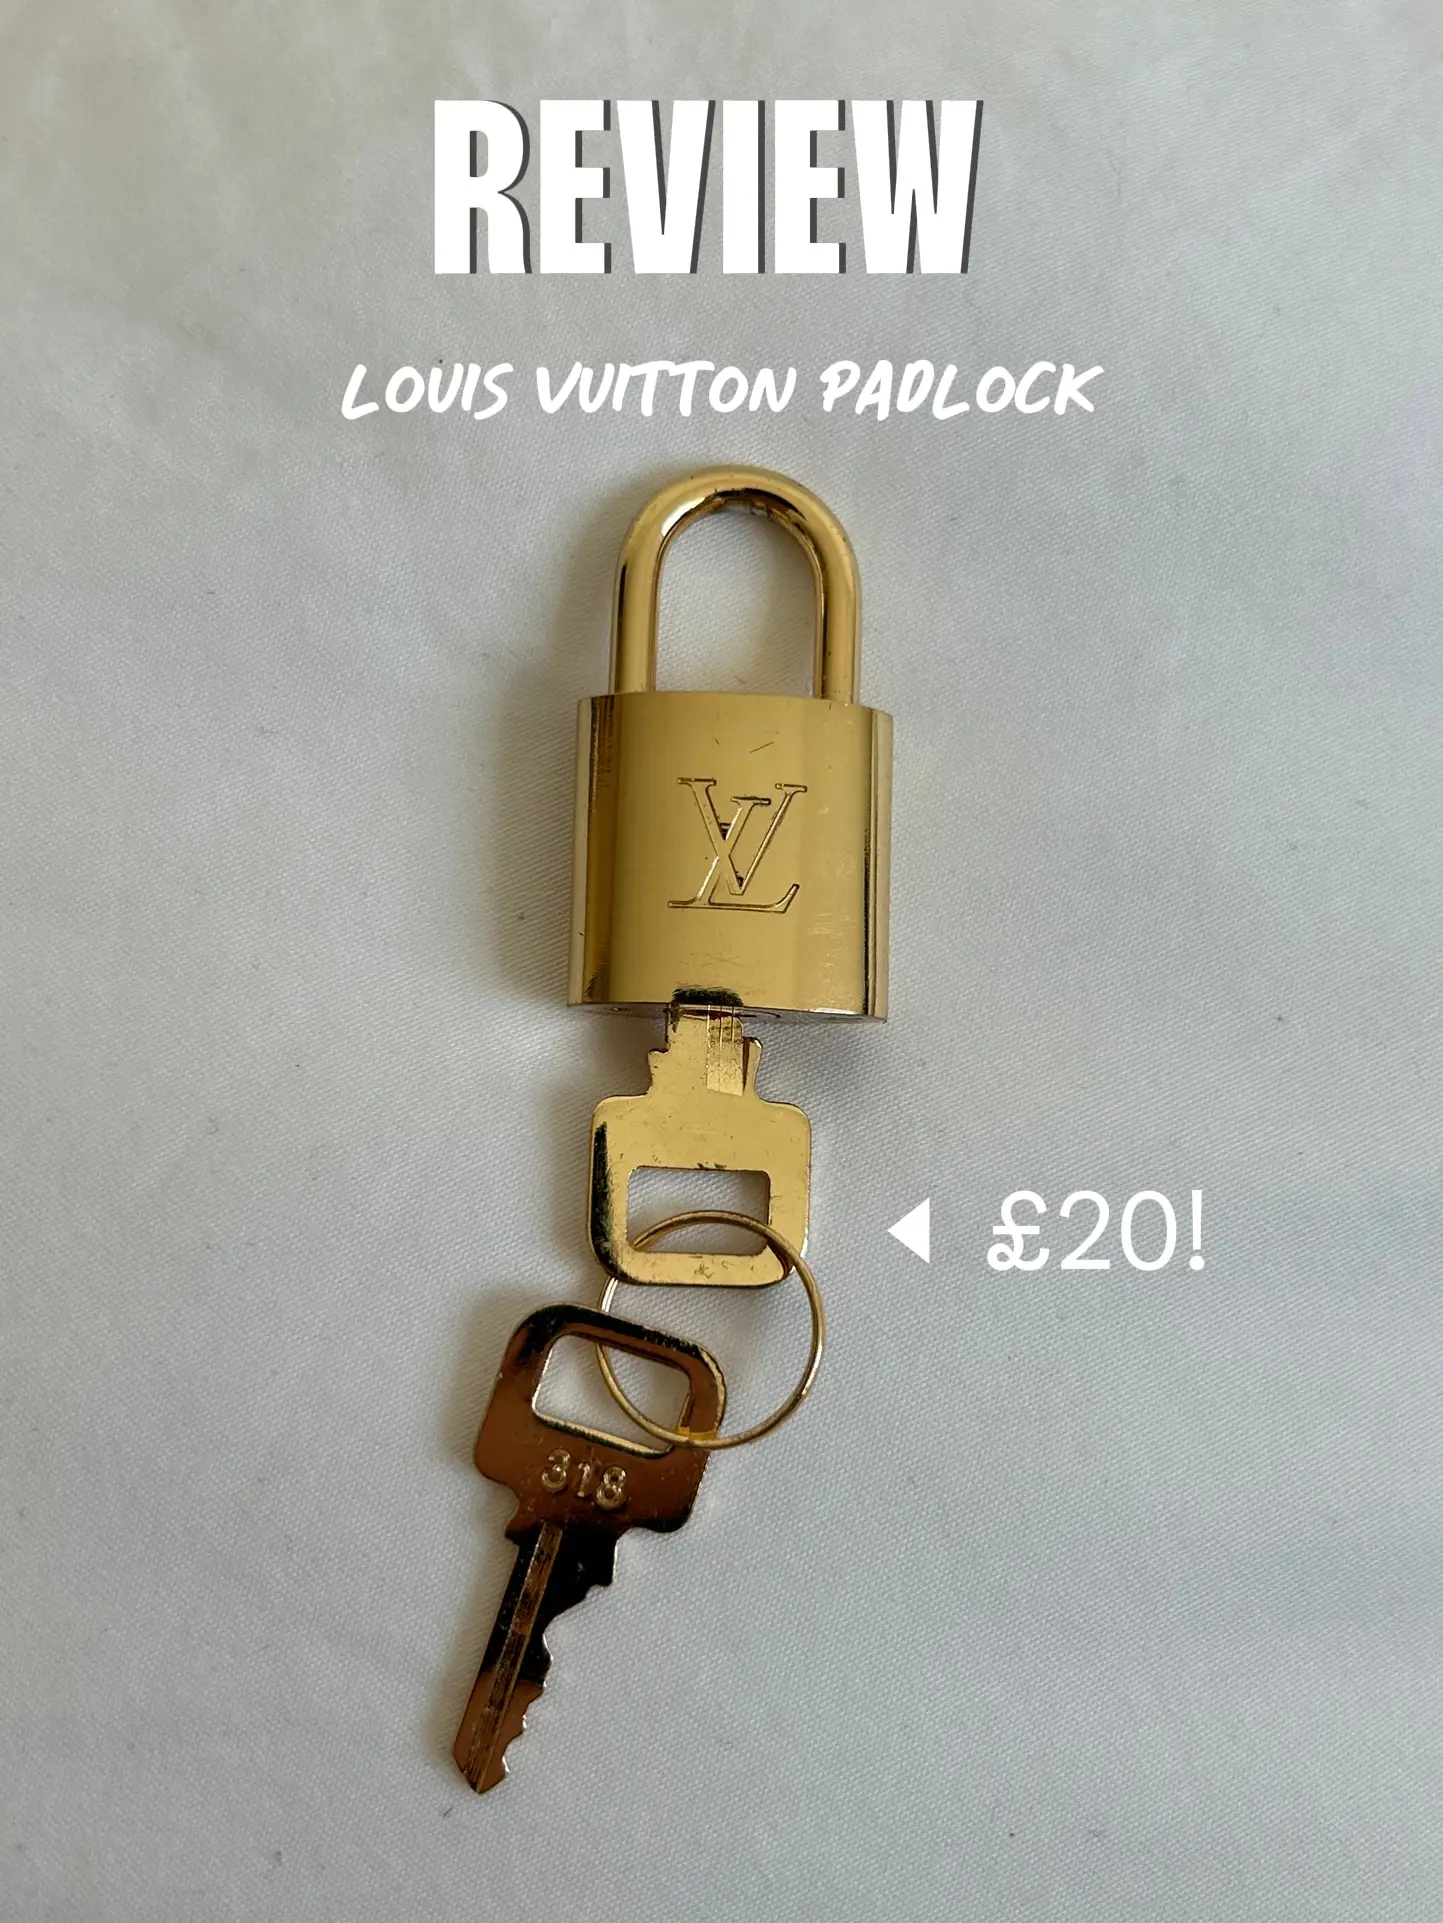 Louis Vuitton Padlock Review, Gallery posted by Penny